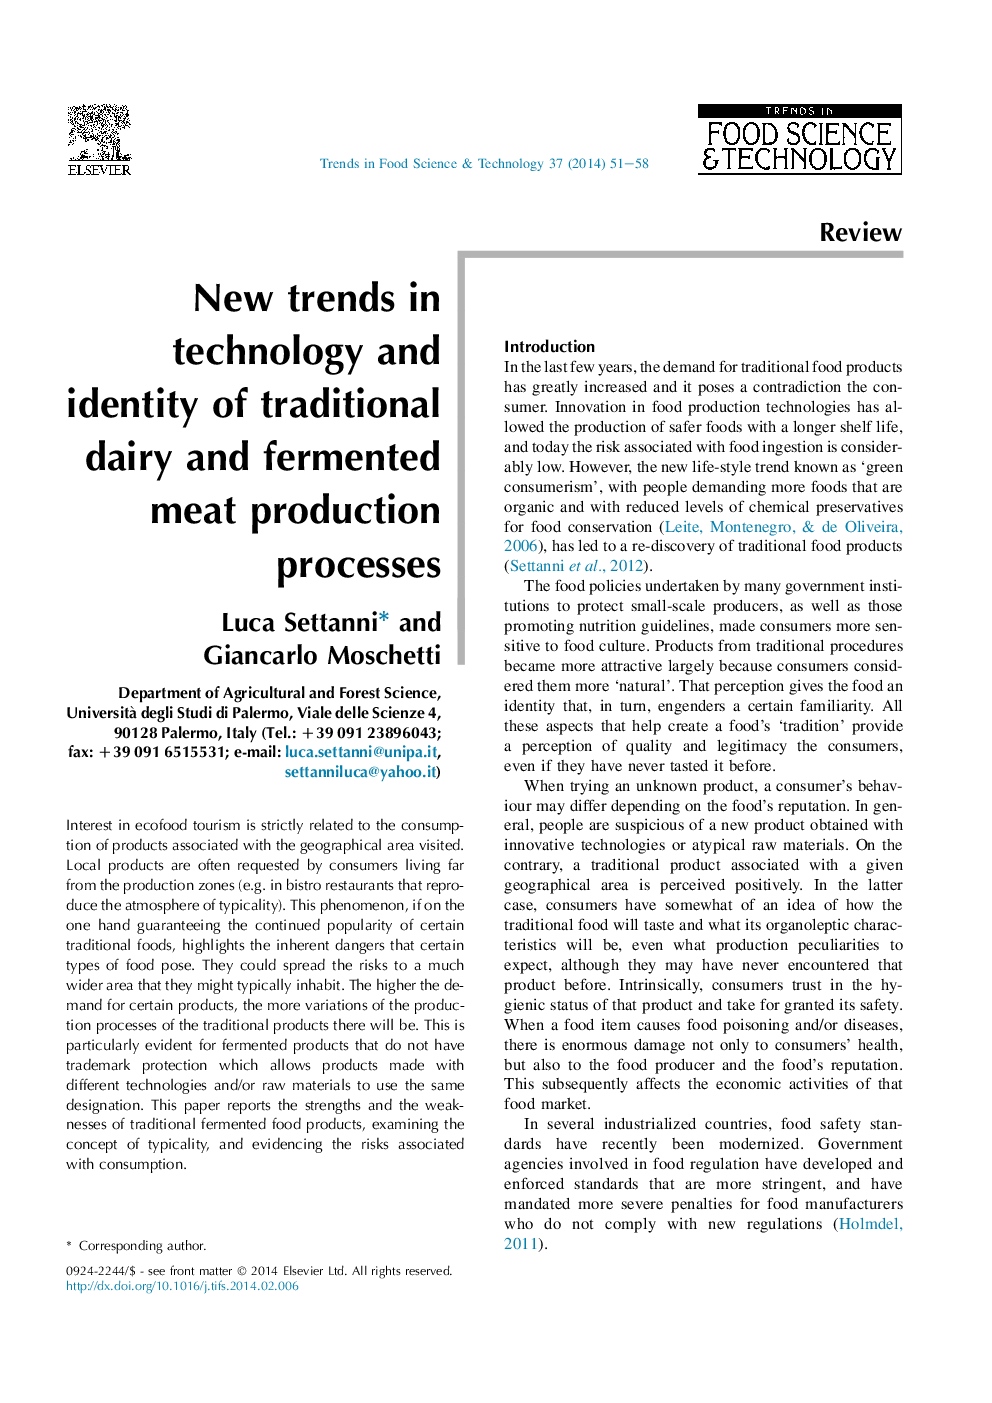 New trends in technology and identity of traditional dairy and fermented meat production processes: Preservation of typicality and hygiene